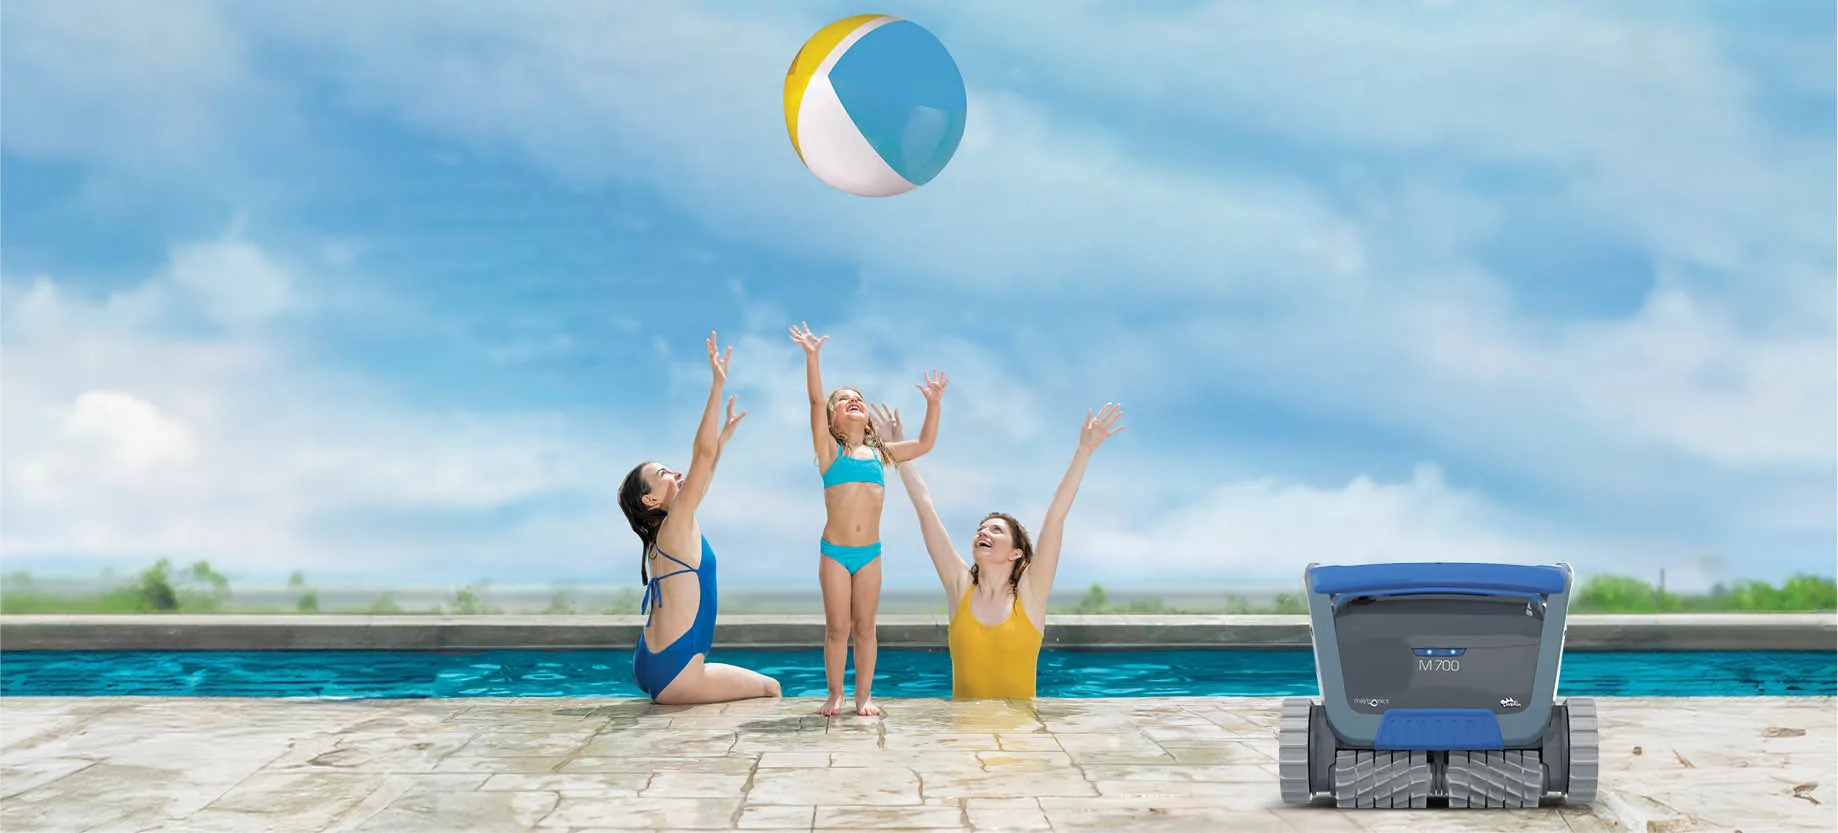 Robotic pool cleaners let you have fun hassle-free